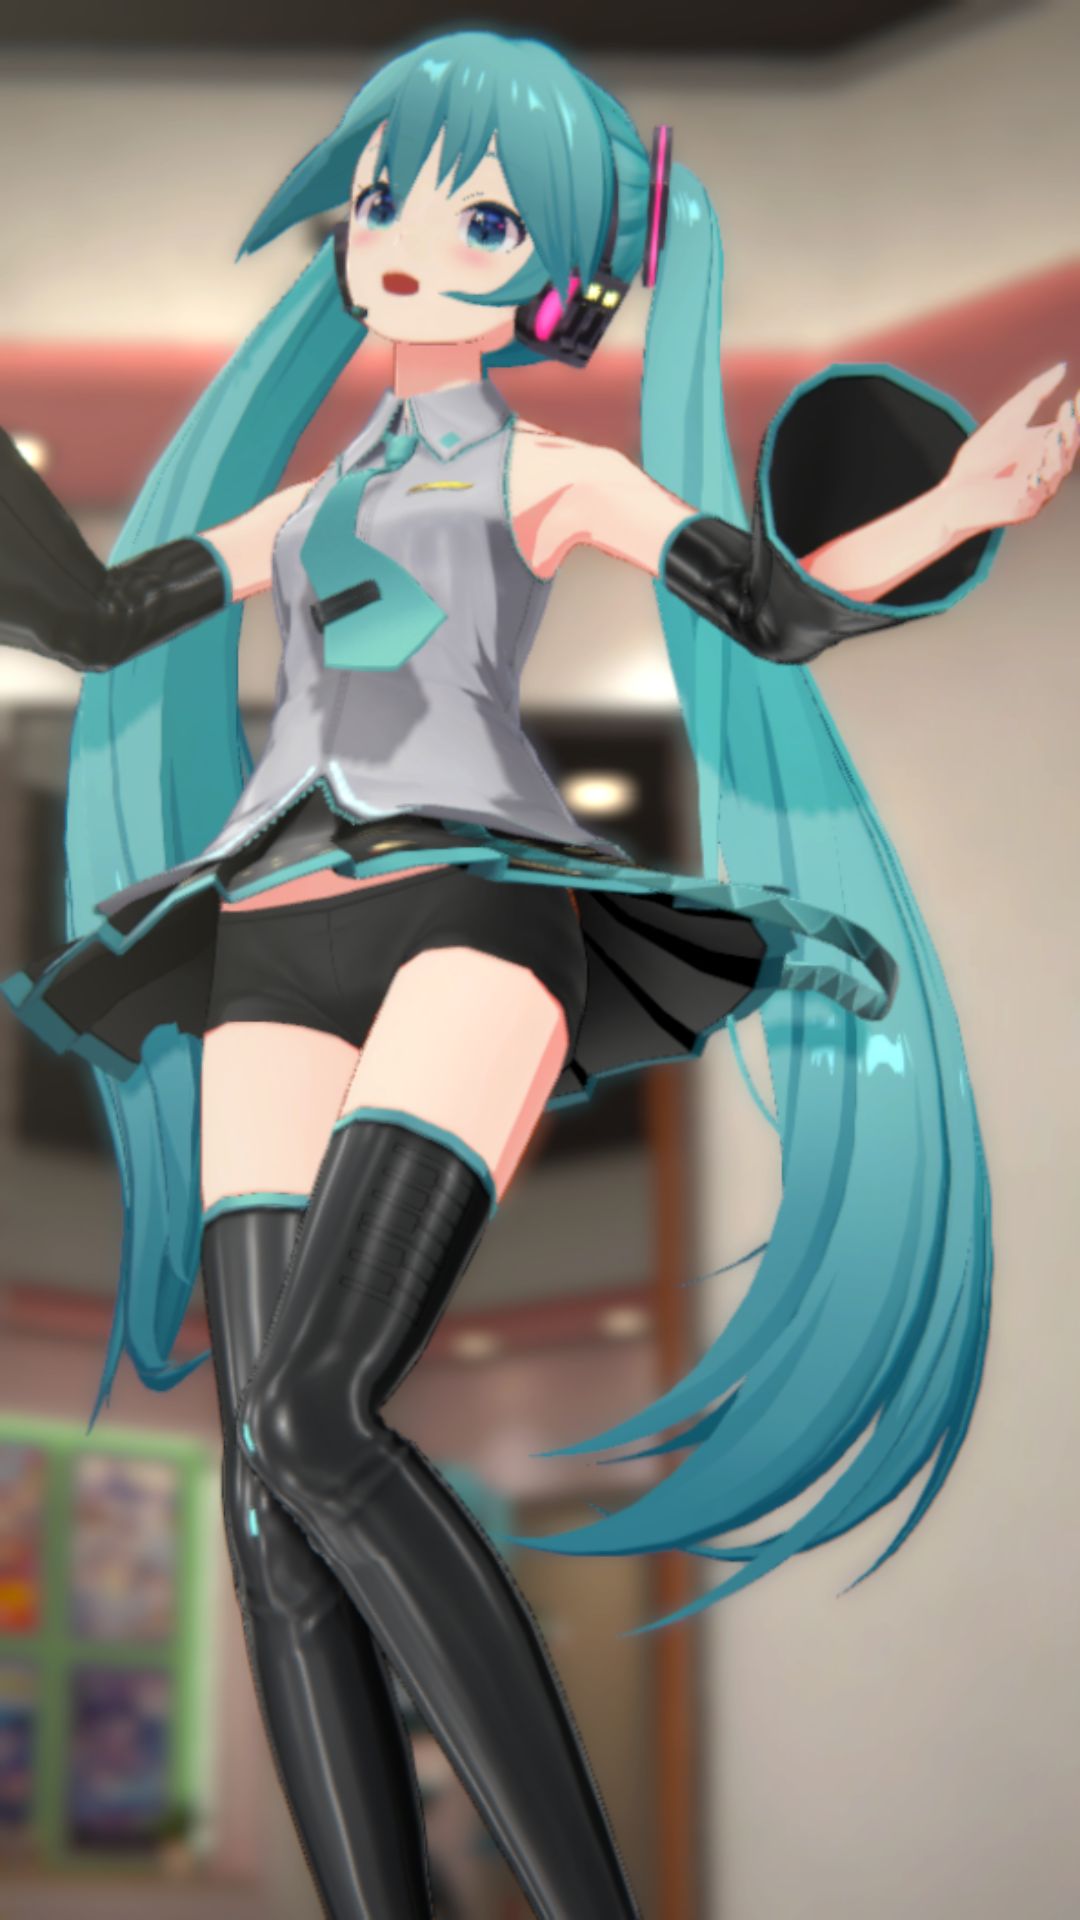 The result of peeking into the contents of the skirt of the smartphone game "IDOLY PRIDE" Hatsune Miku and Hatsune Miku costume 13